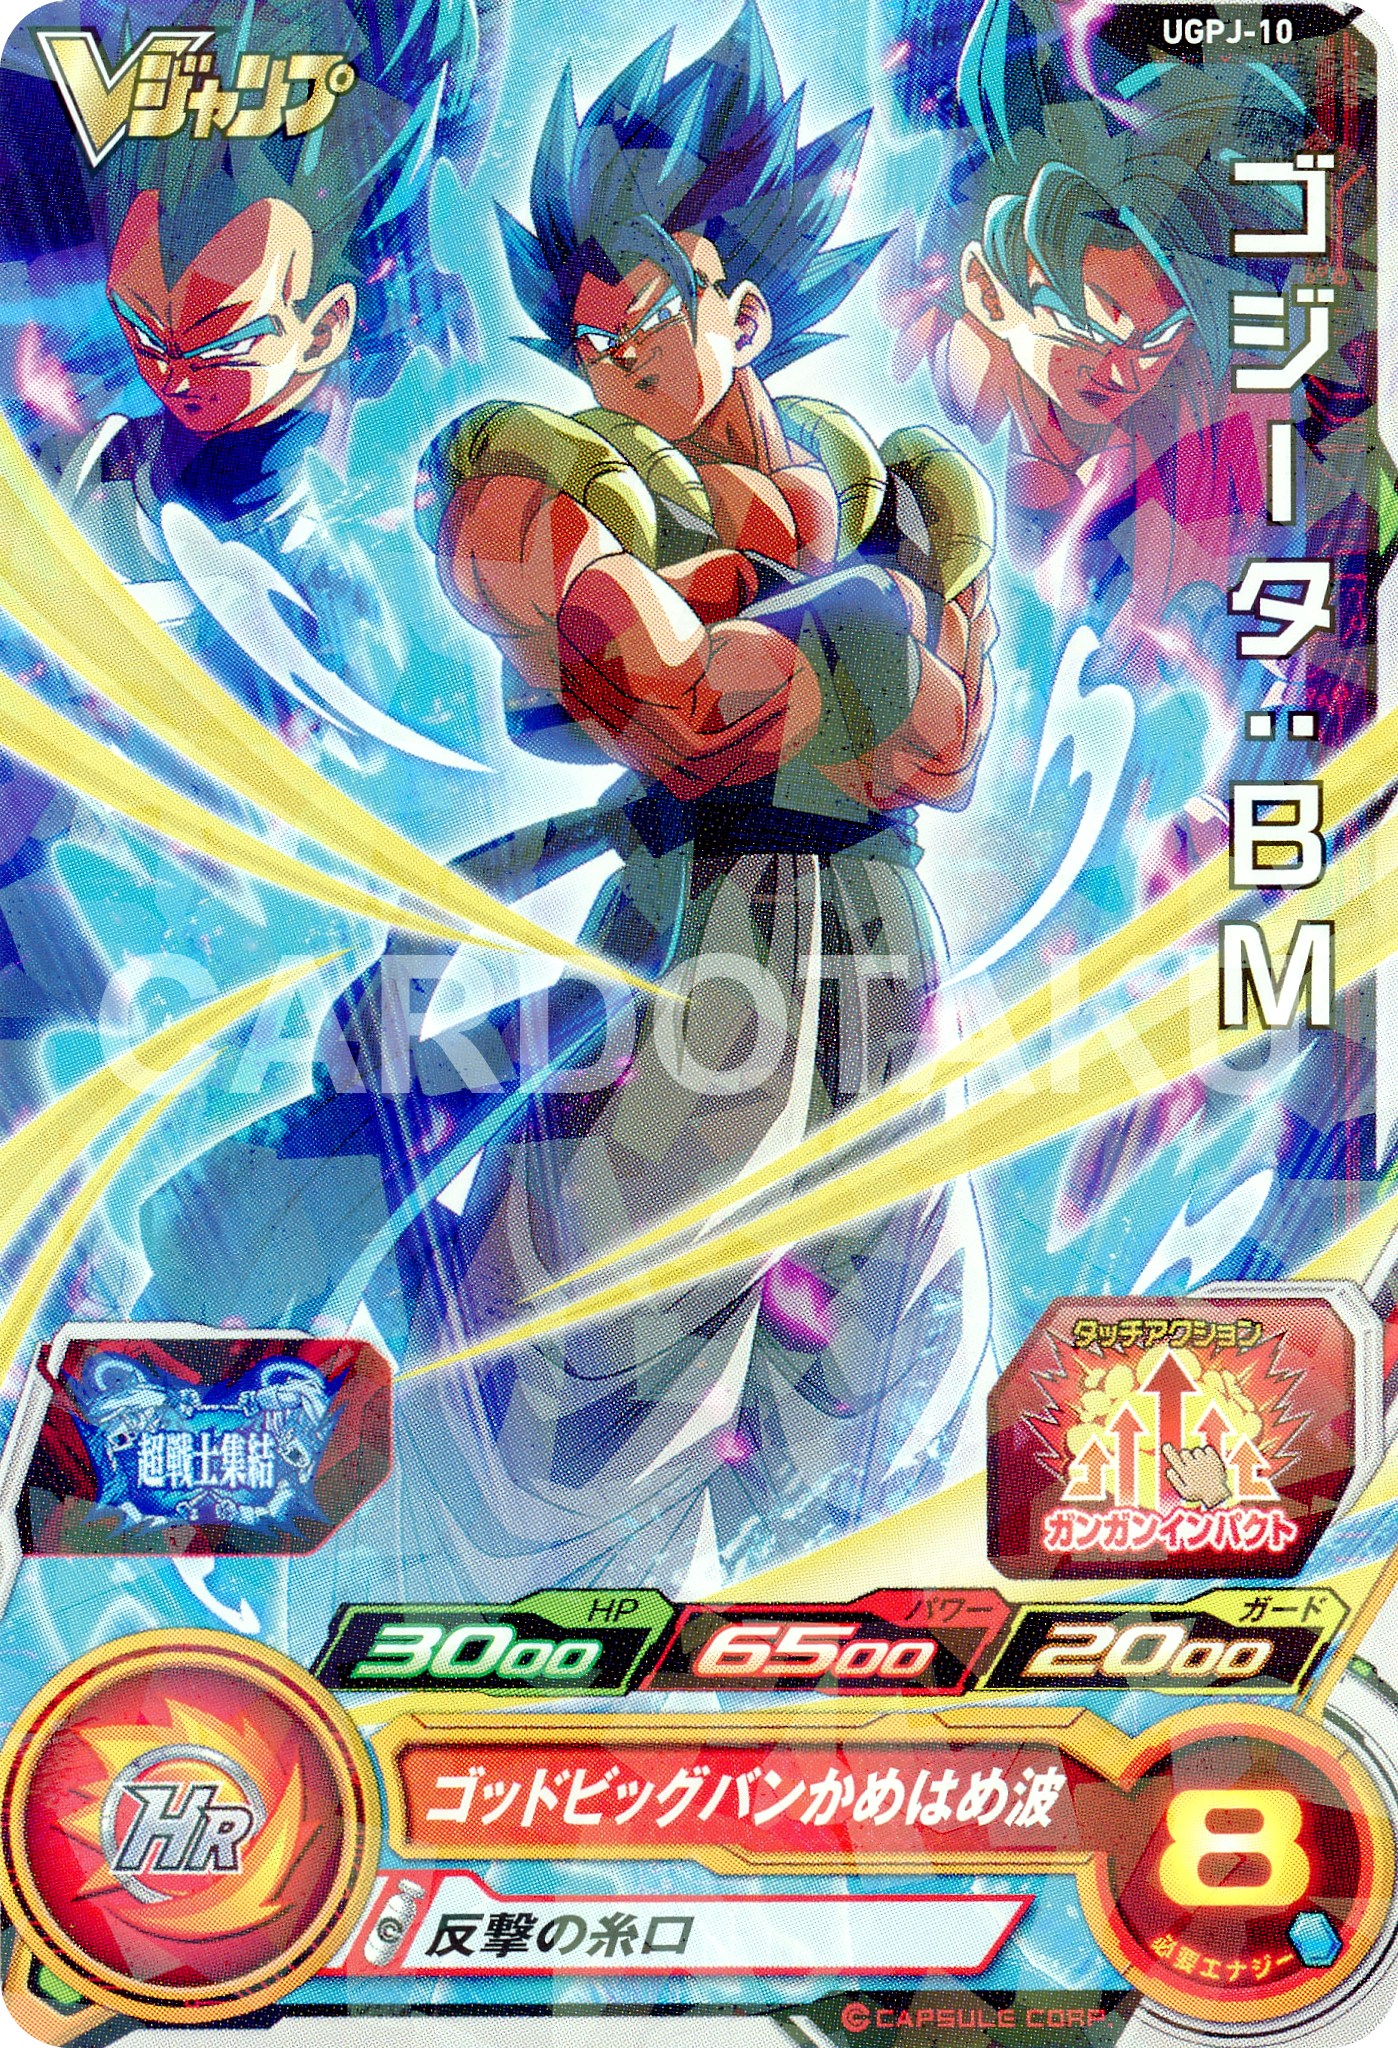 SUPER DRAGON BALL HEROES UGPJ-10  Promotional card sold with the September 2022 issue of V Jump magazine released July 21 2022  Gogeta : BM SSGSS